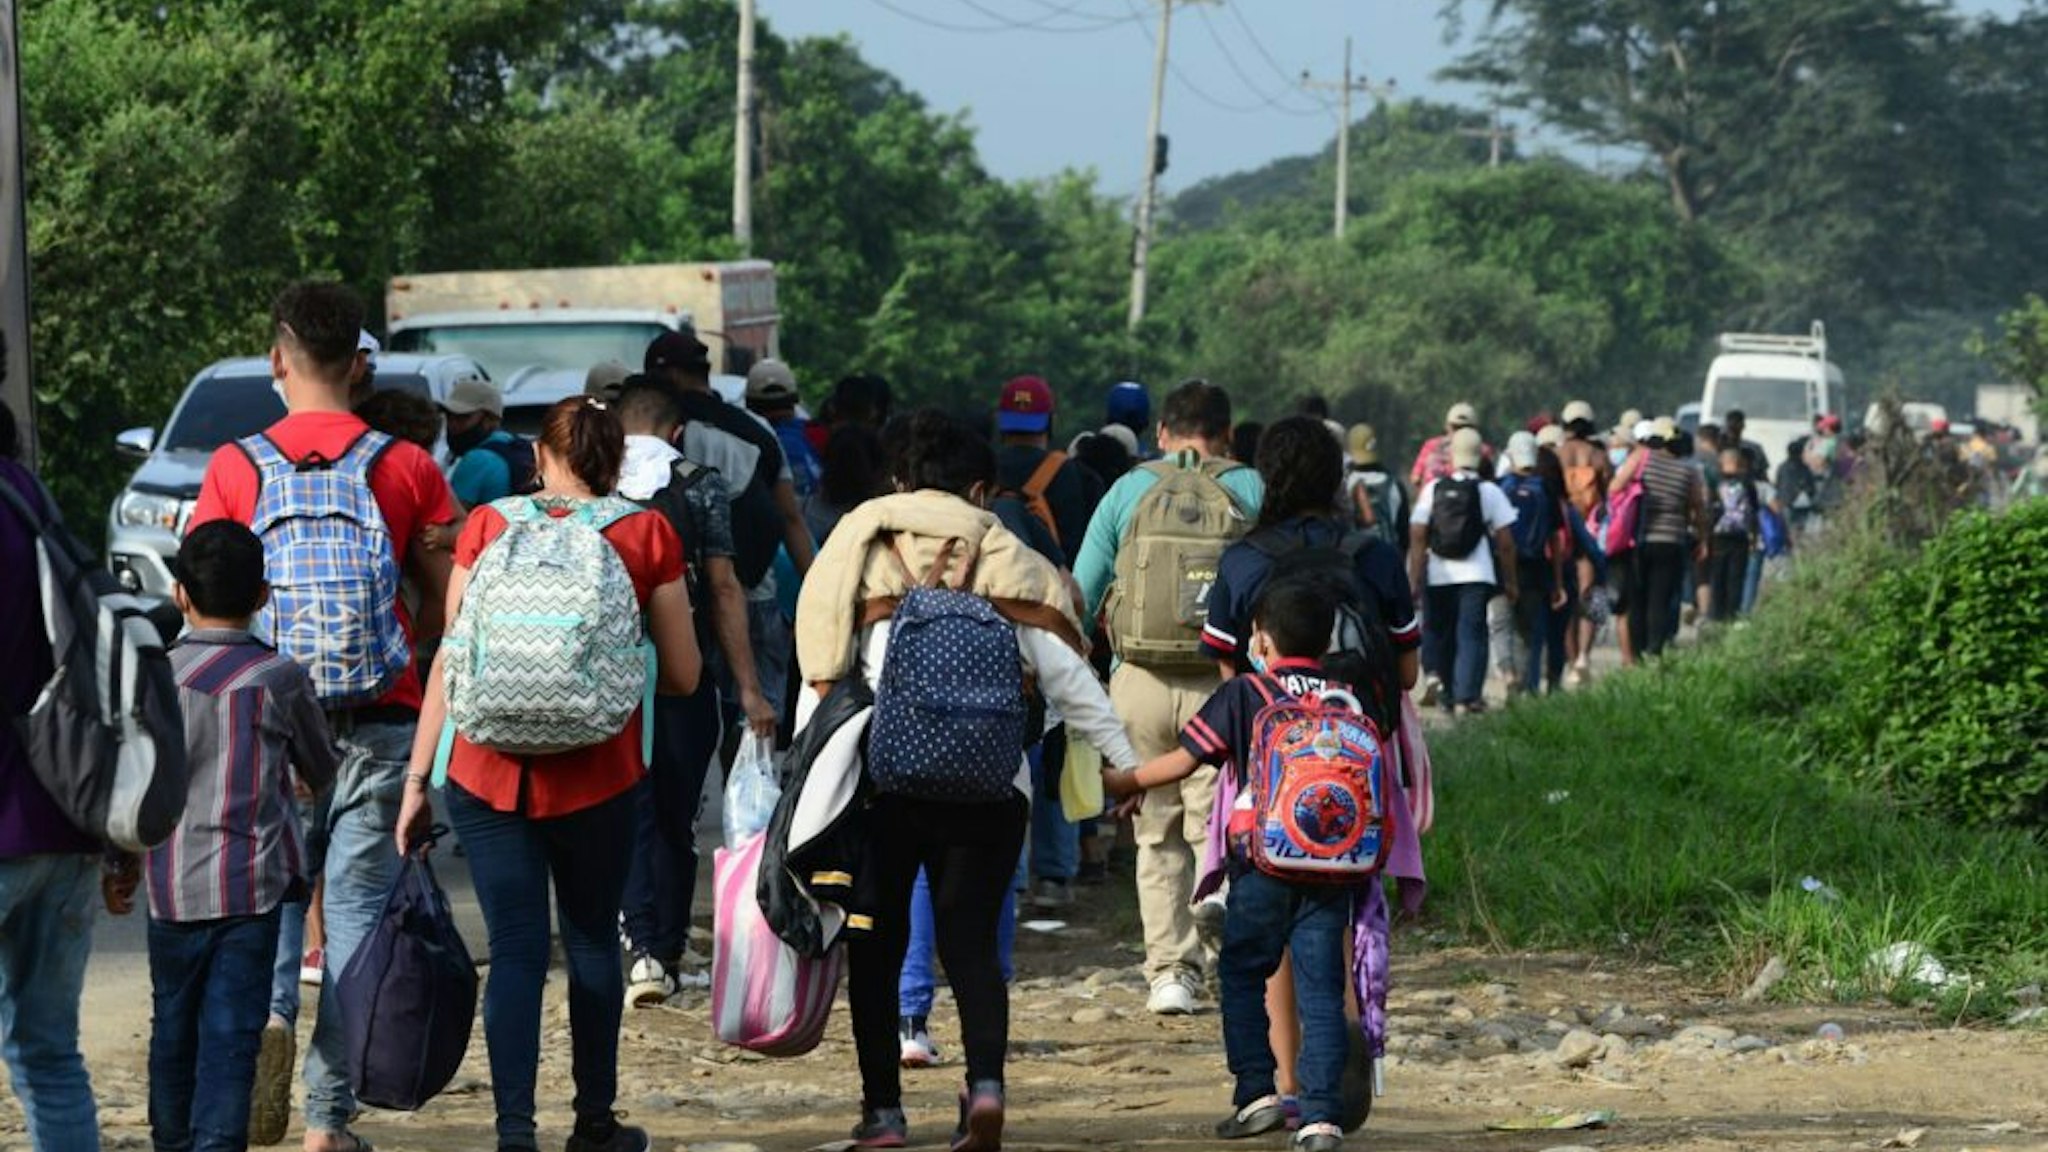 Honduran migrants move to Agua Caliente, on the border between Honduras and Guatemala, on their way to the United States, on January 15, 2021. - Hundreds of asylum seekers are forming new migrant caravans in Honduras, planning to walk thousands of kilometers through Central America to the United States via Guatemala and Mexico, in search of a better life under the new administration of President-elect Joe Biden.